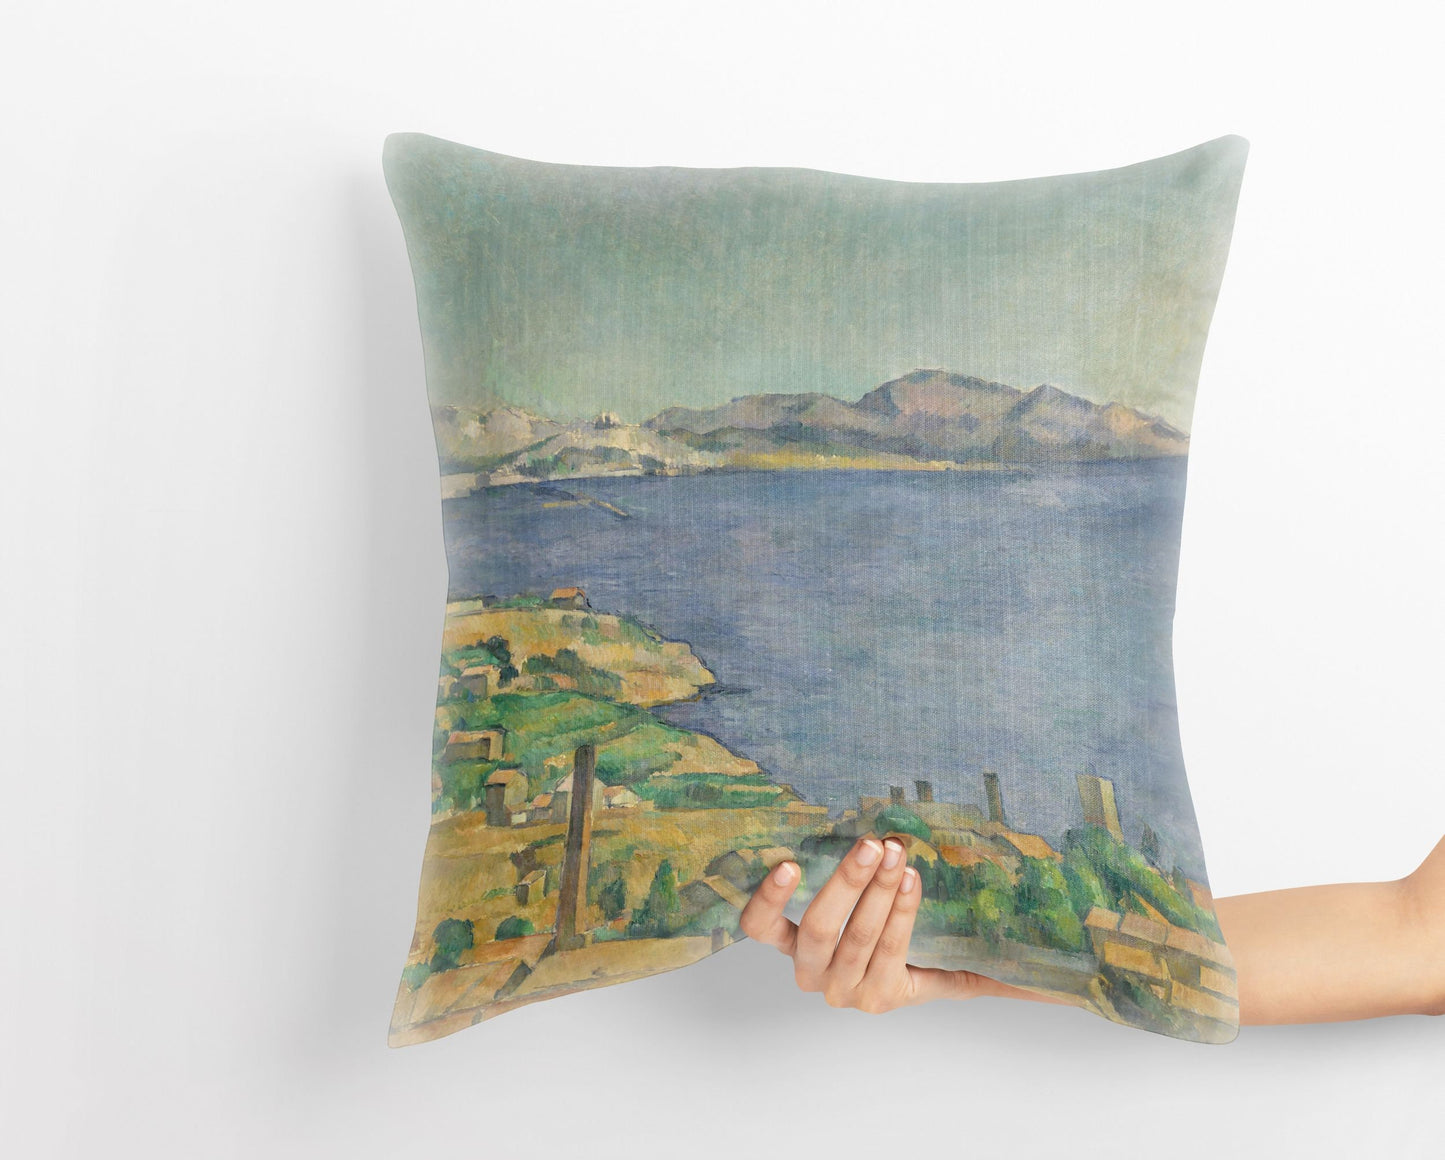 Paul Cezanne Famous Art, Throw Pillow Cover, Abstract Throw Pillow, Soft Pillow Cases, Green And Yellow, Housewarming Gift, Holiday Gift